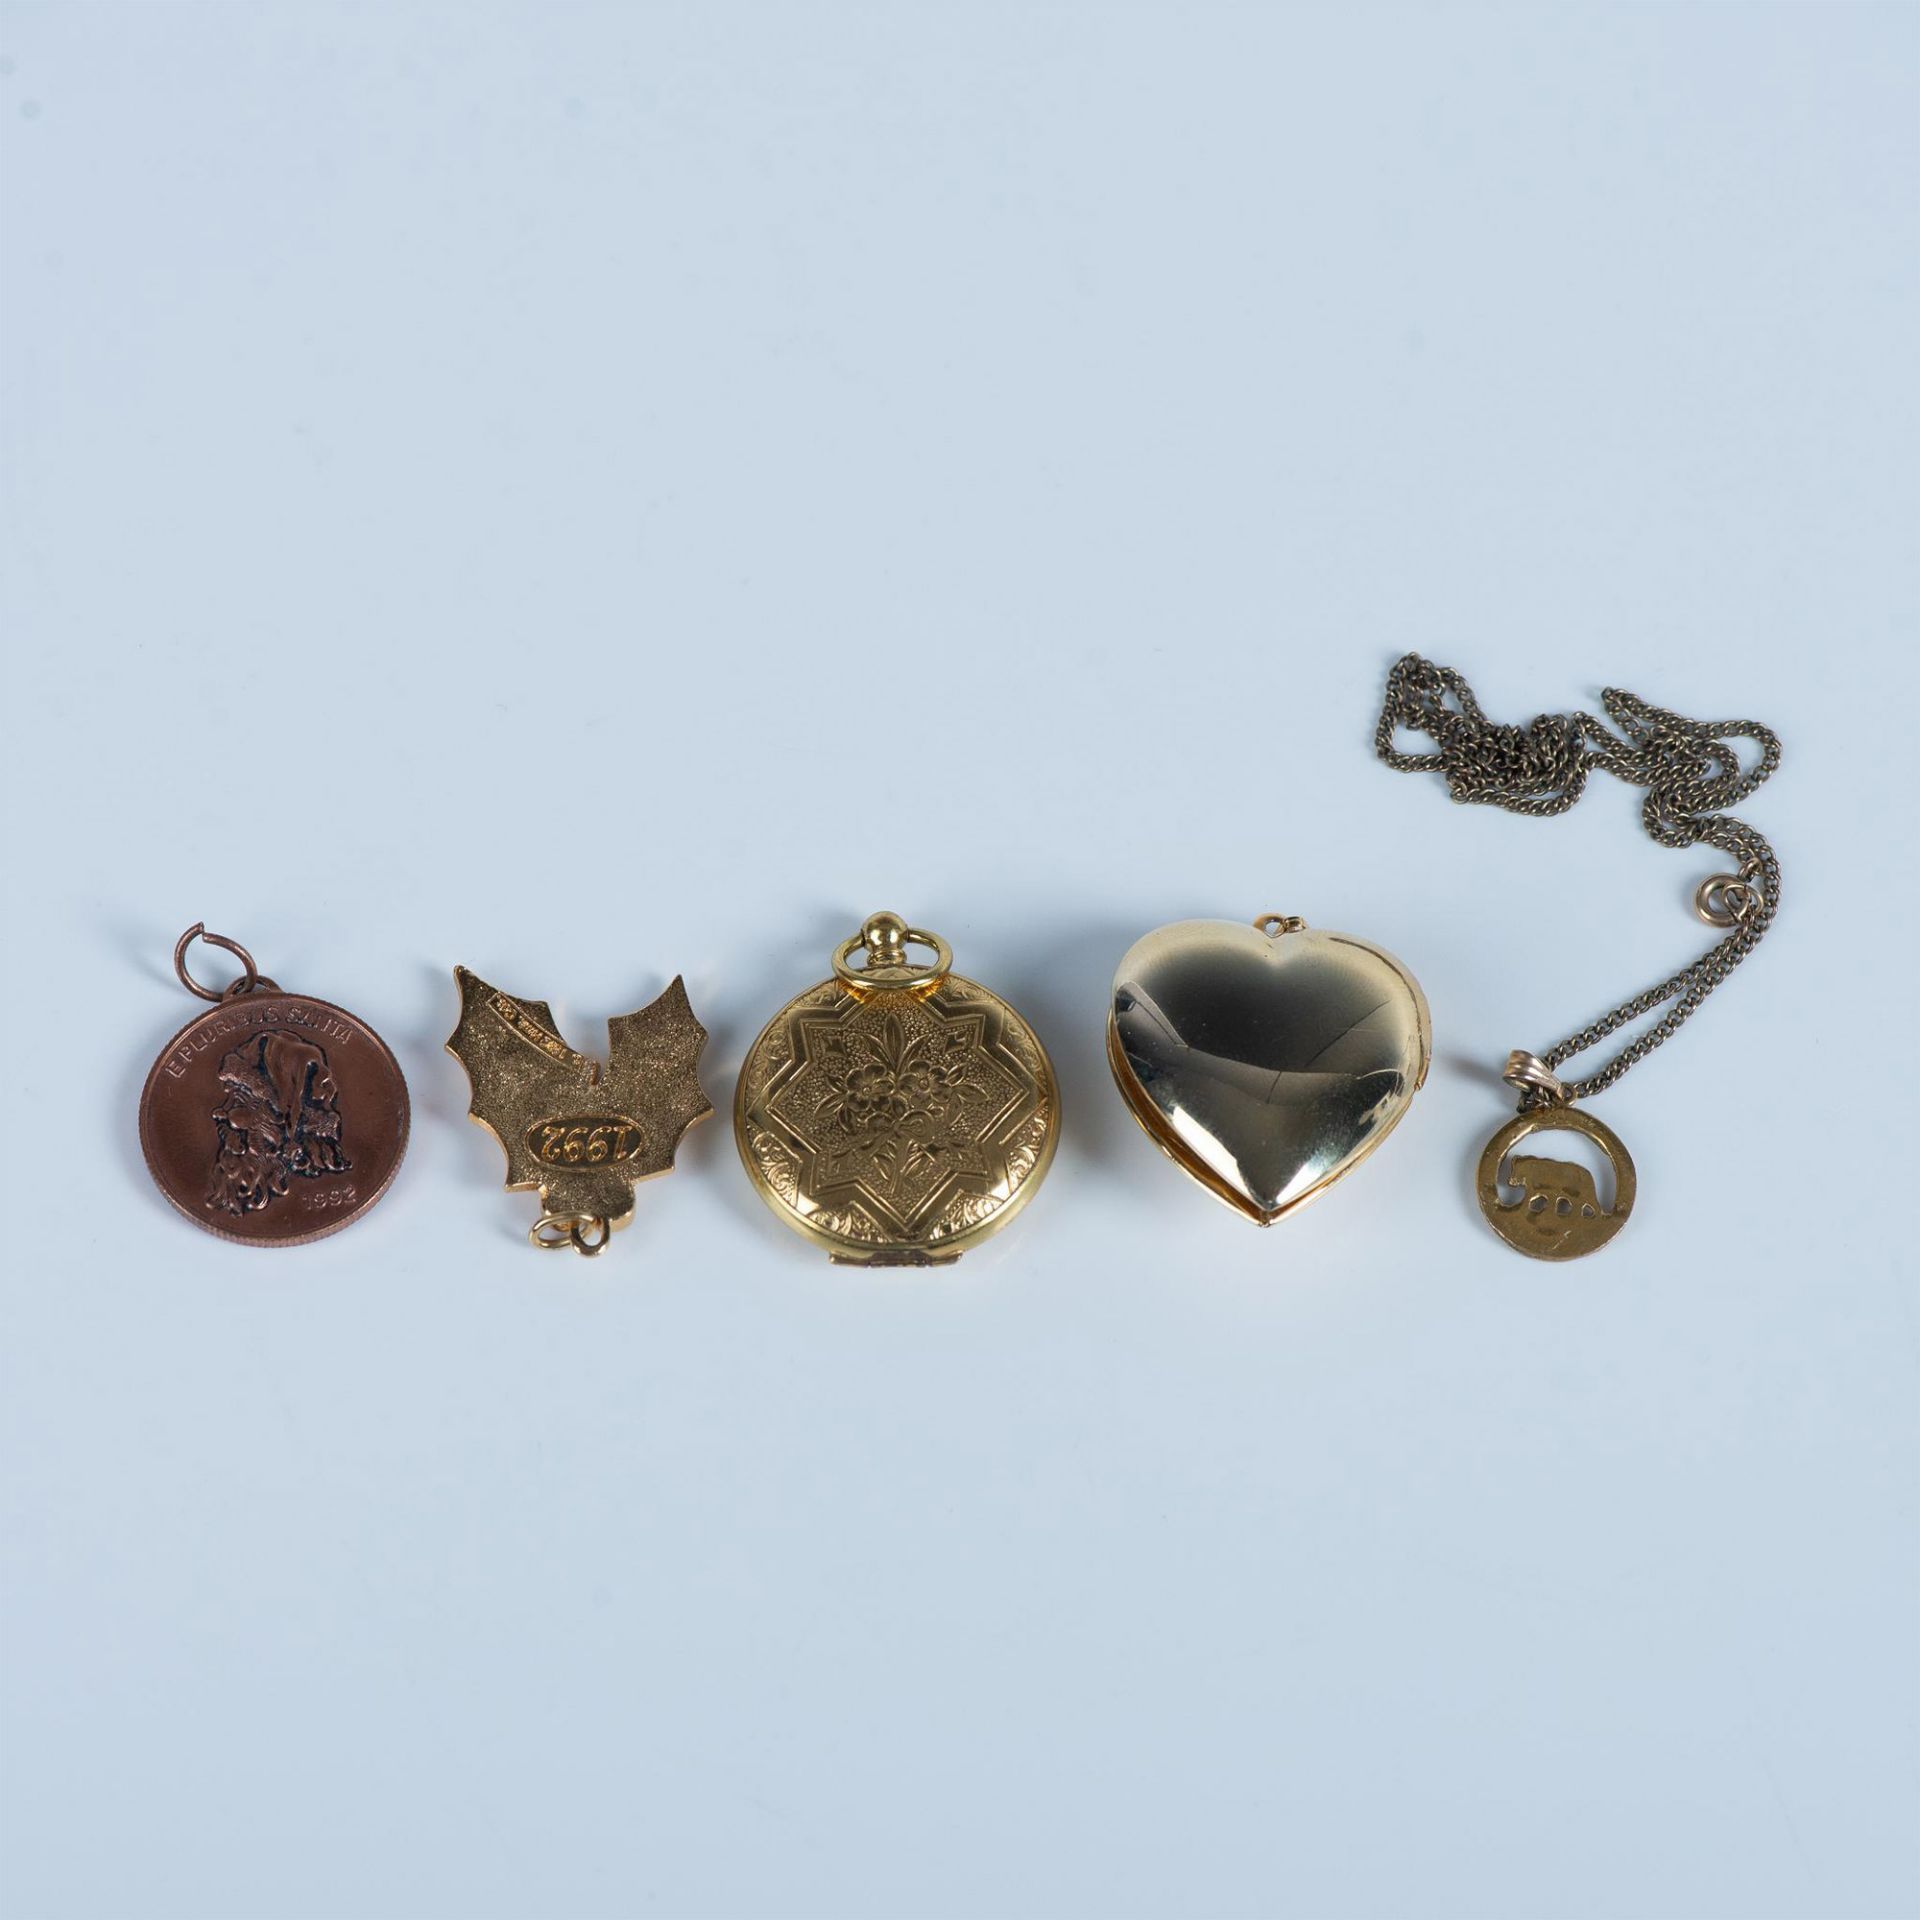 5pc Gold Tone Lockets and Charms - Image 2 of 8